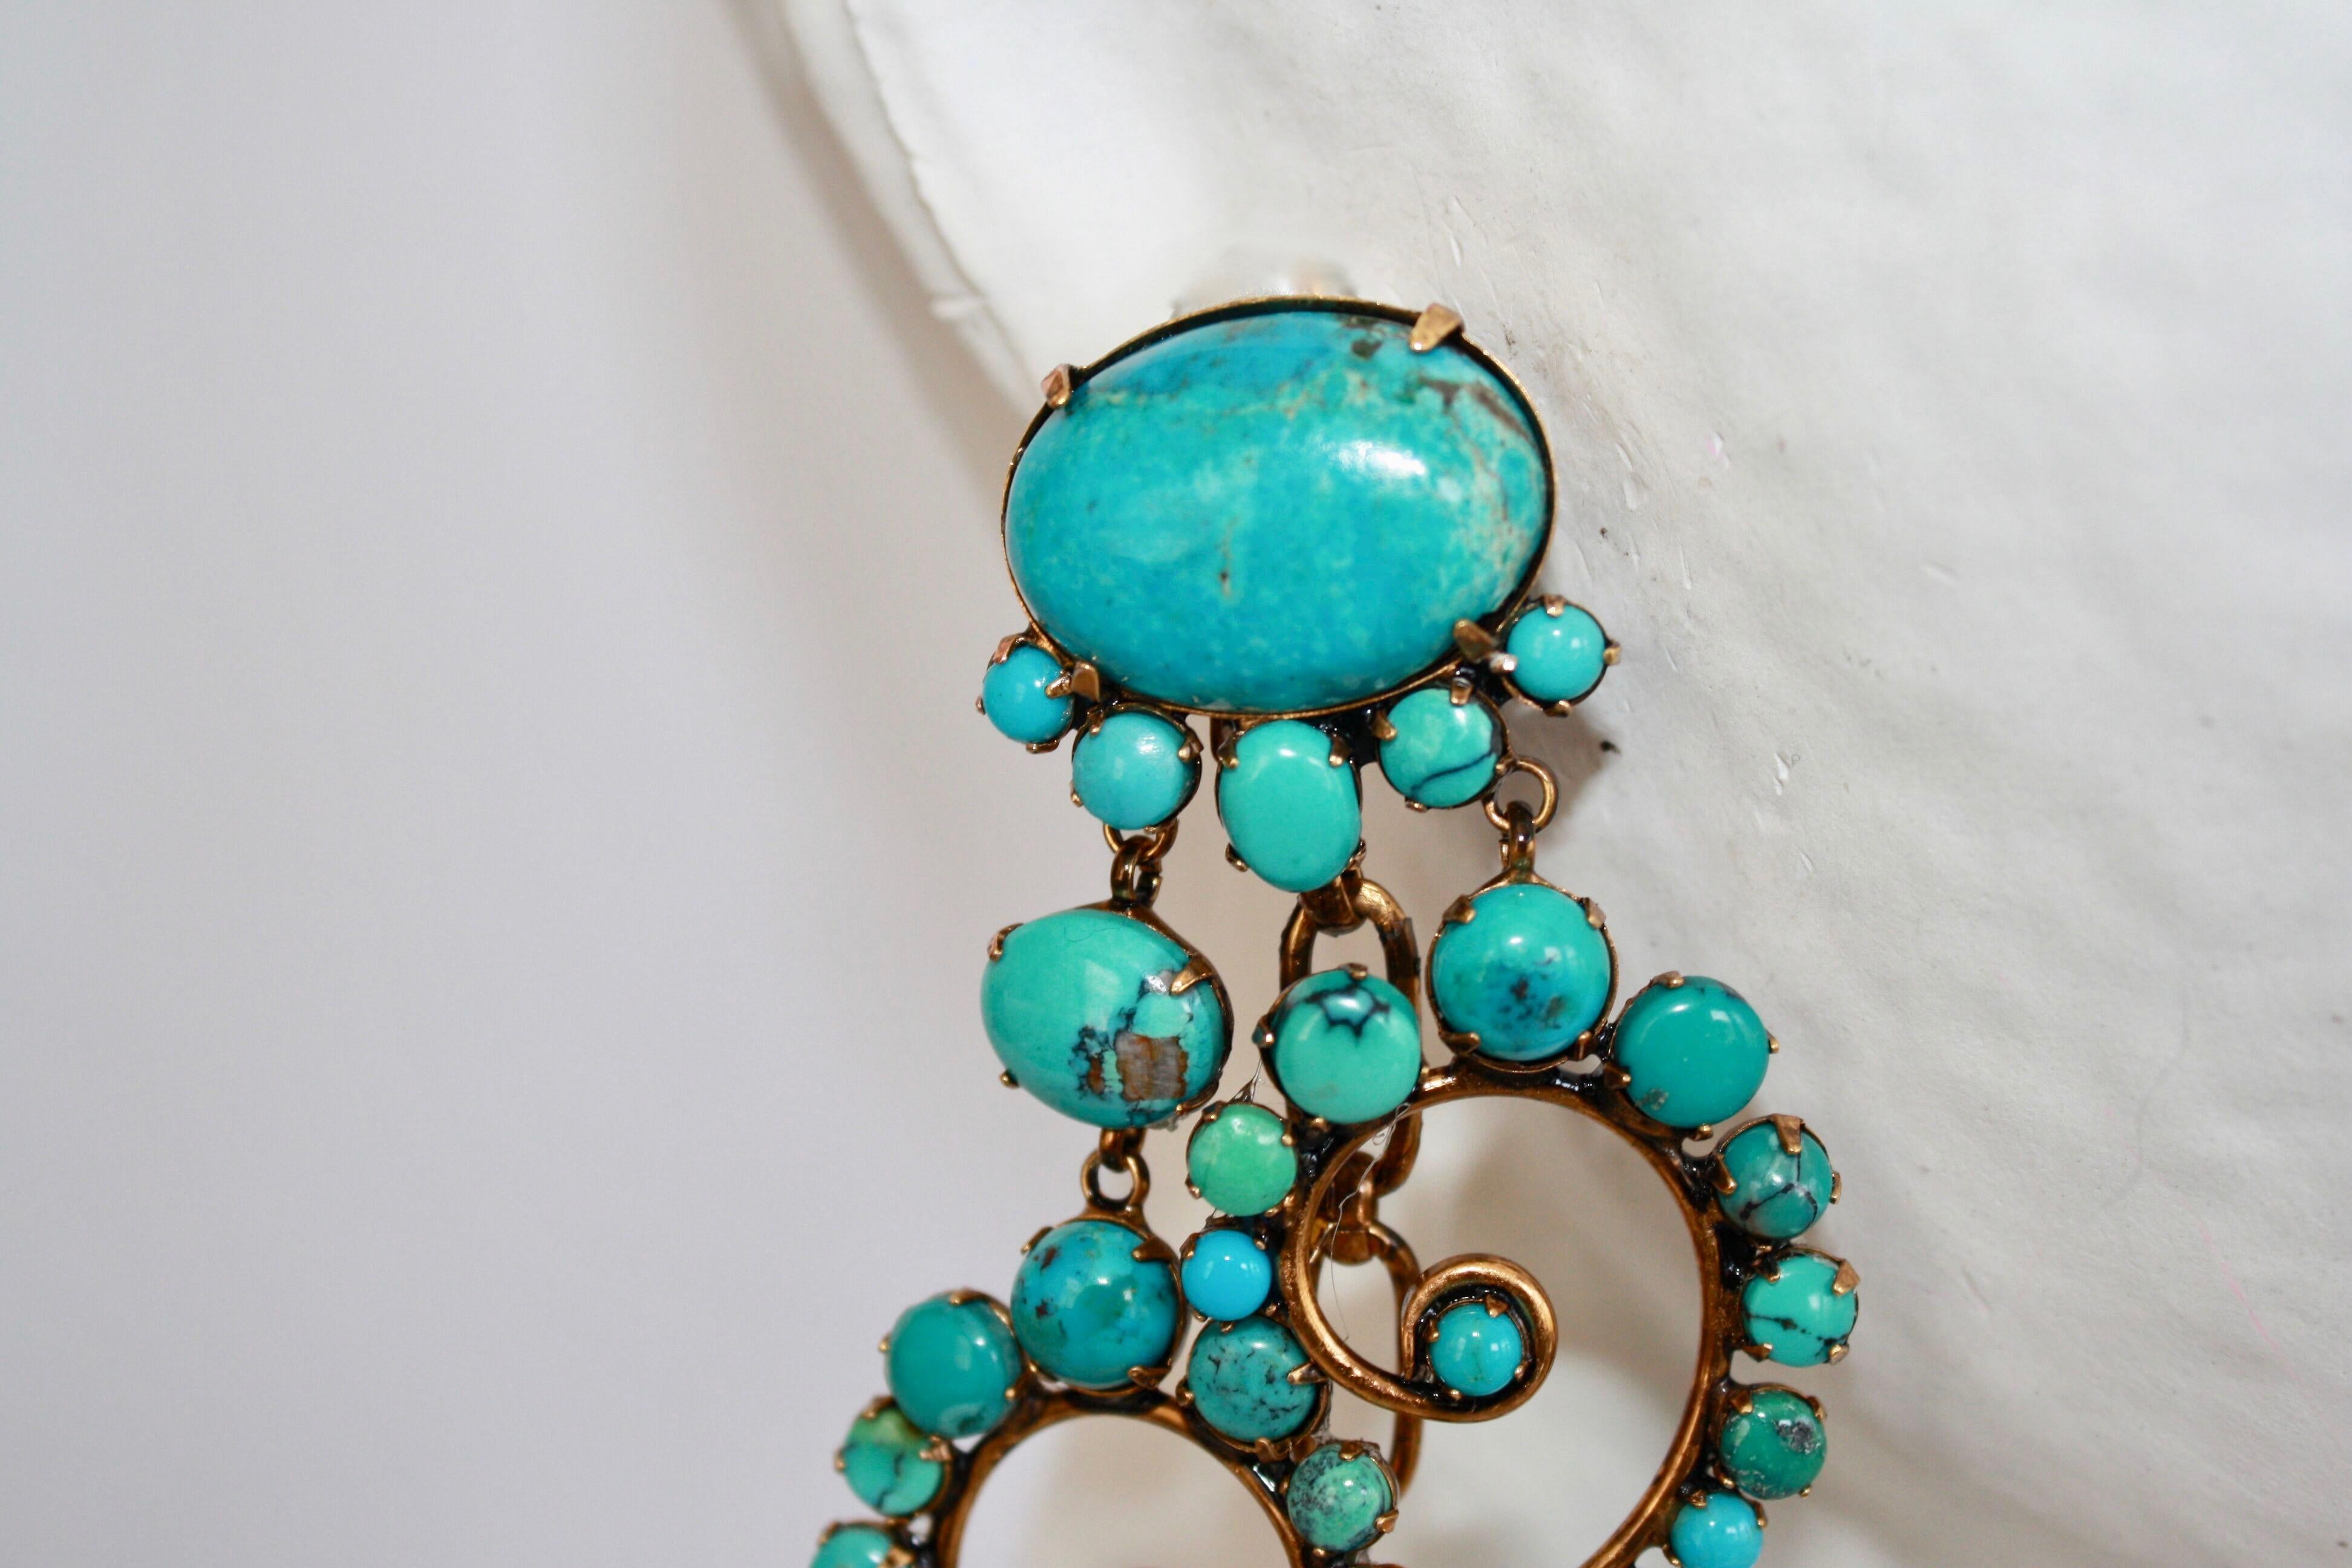 Gorgeous statement earrings in turquoise from Iradj Moini. 